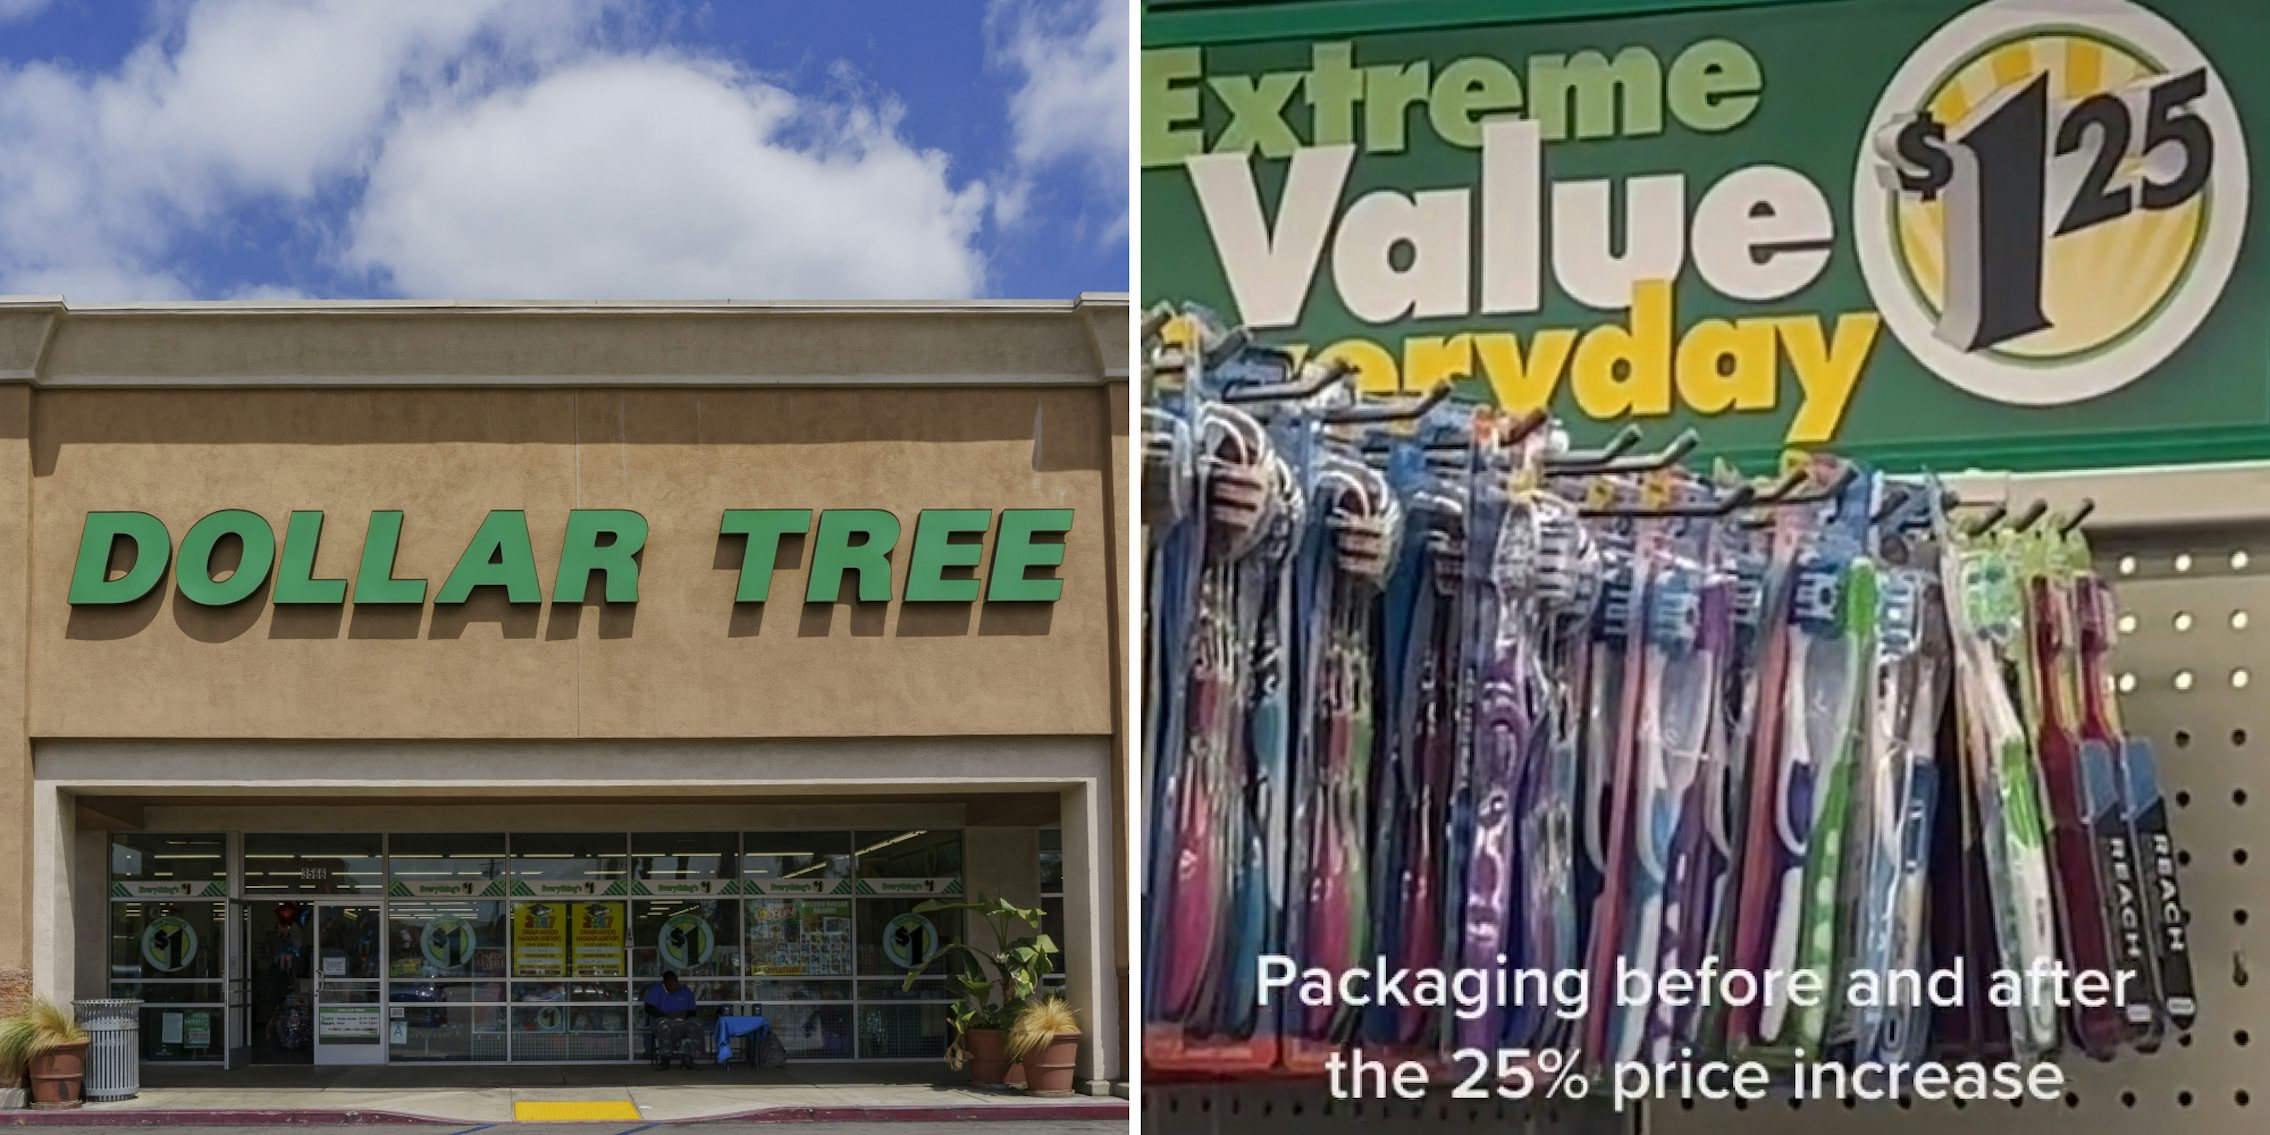 Dollar Tree building and sign (l) Inside dollar tree caption 'Packaging before and after the 25% price increase' (r)